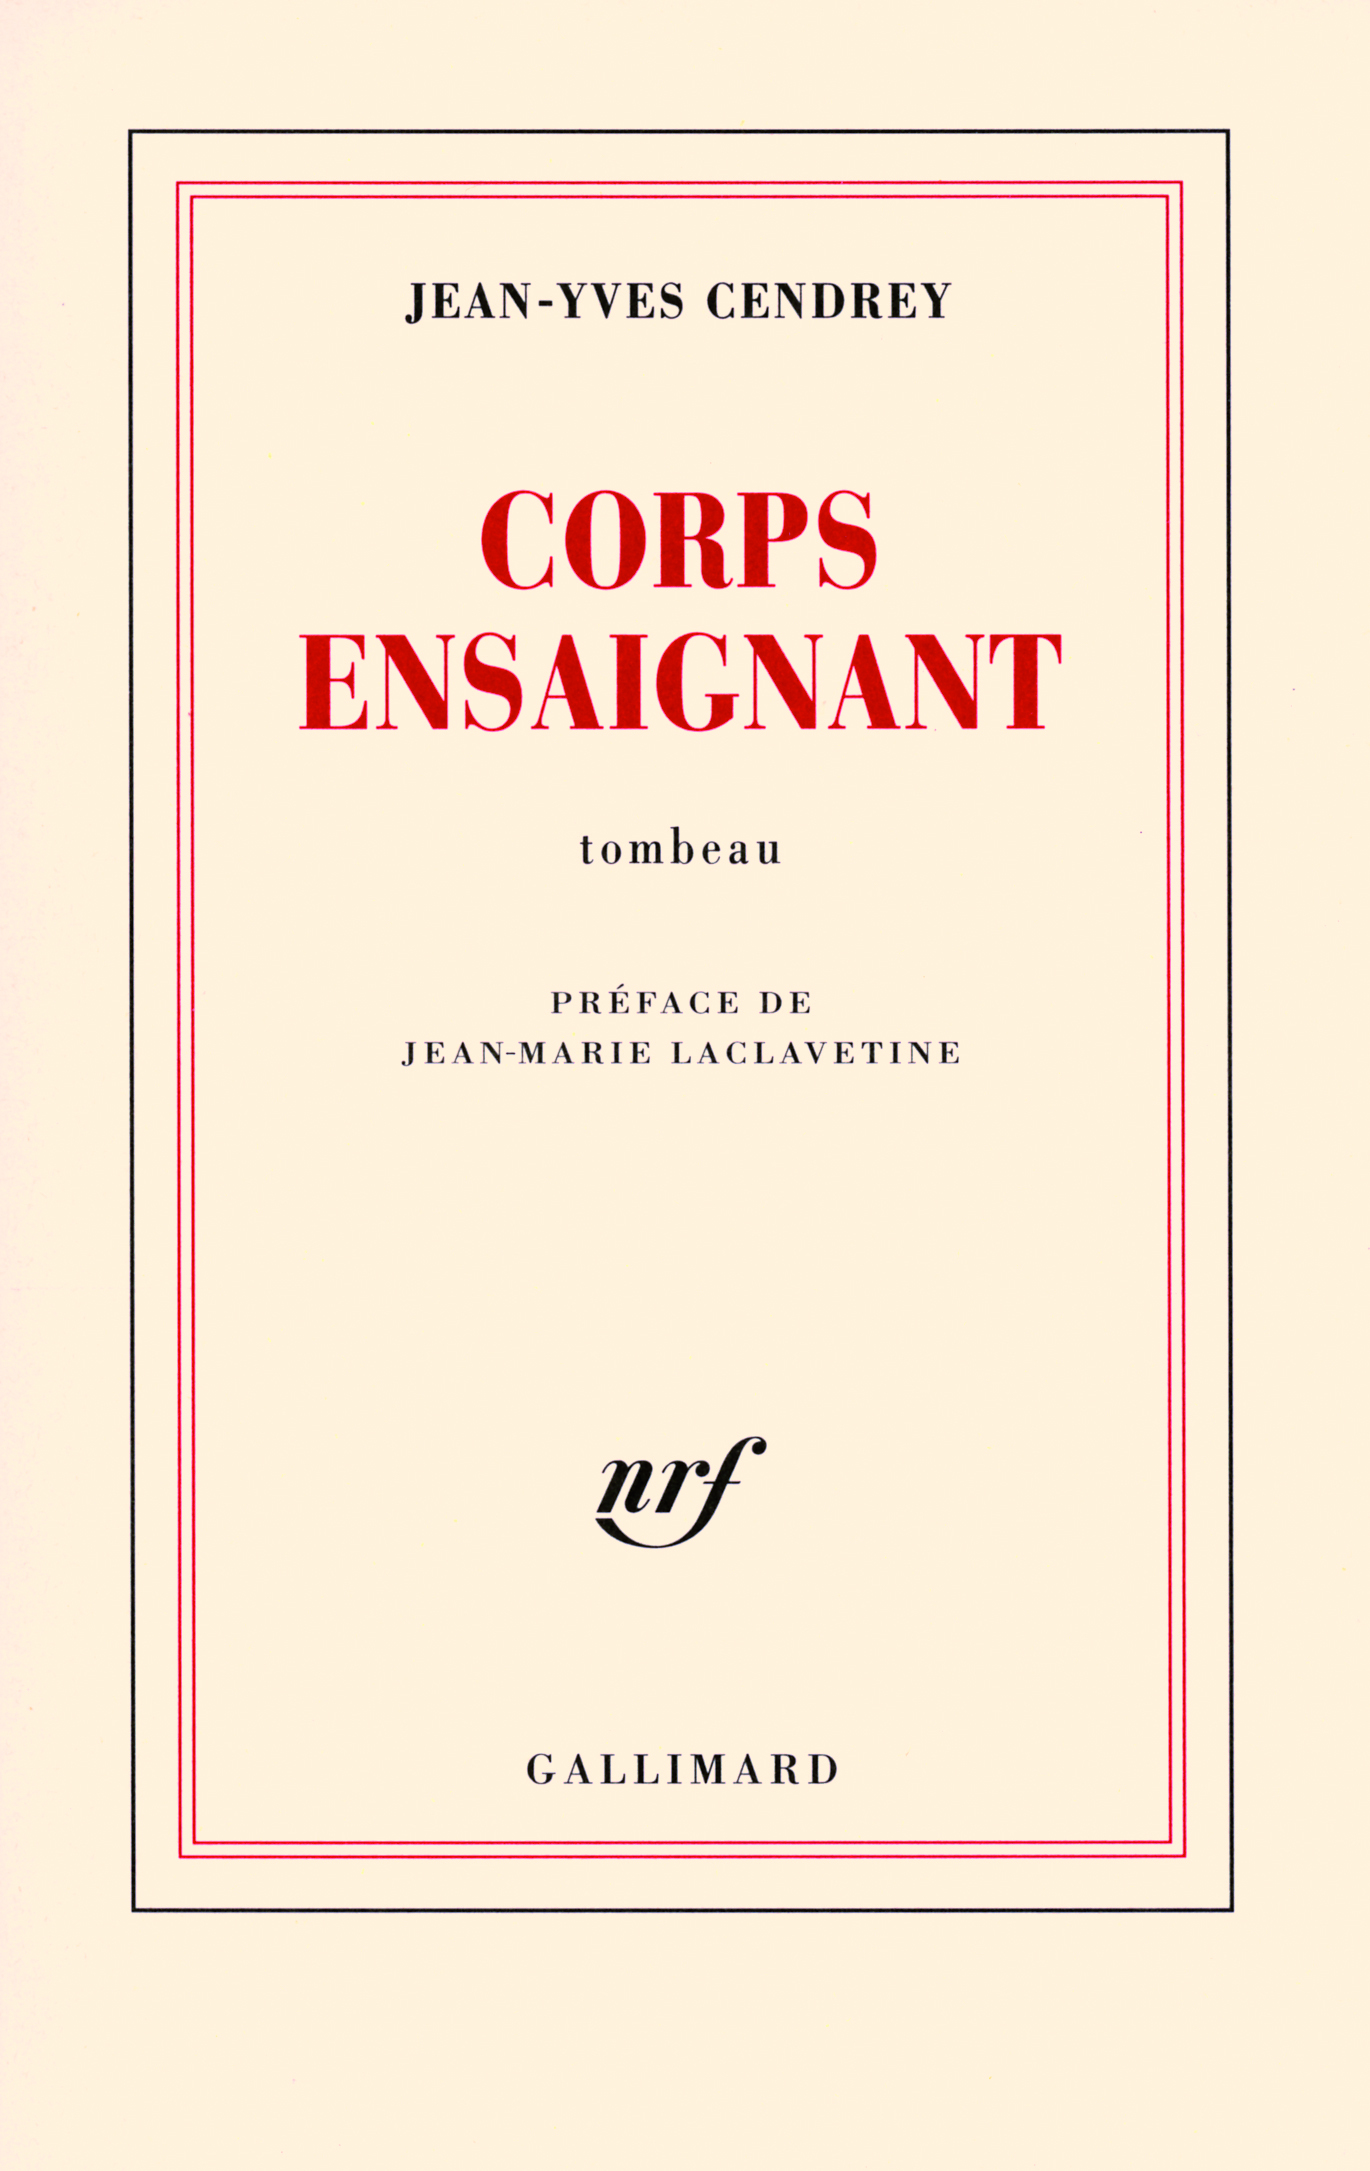 Corps ensaignant, Tombeau (9782070786091-front-cover)